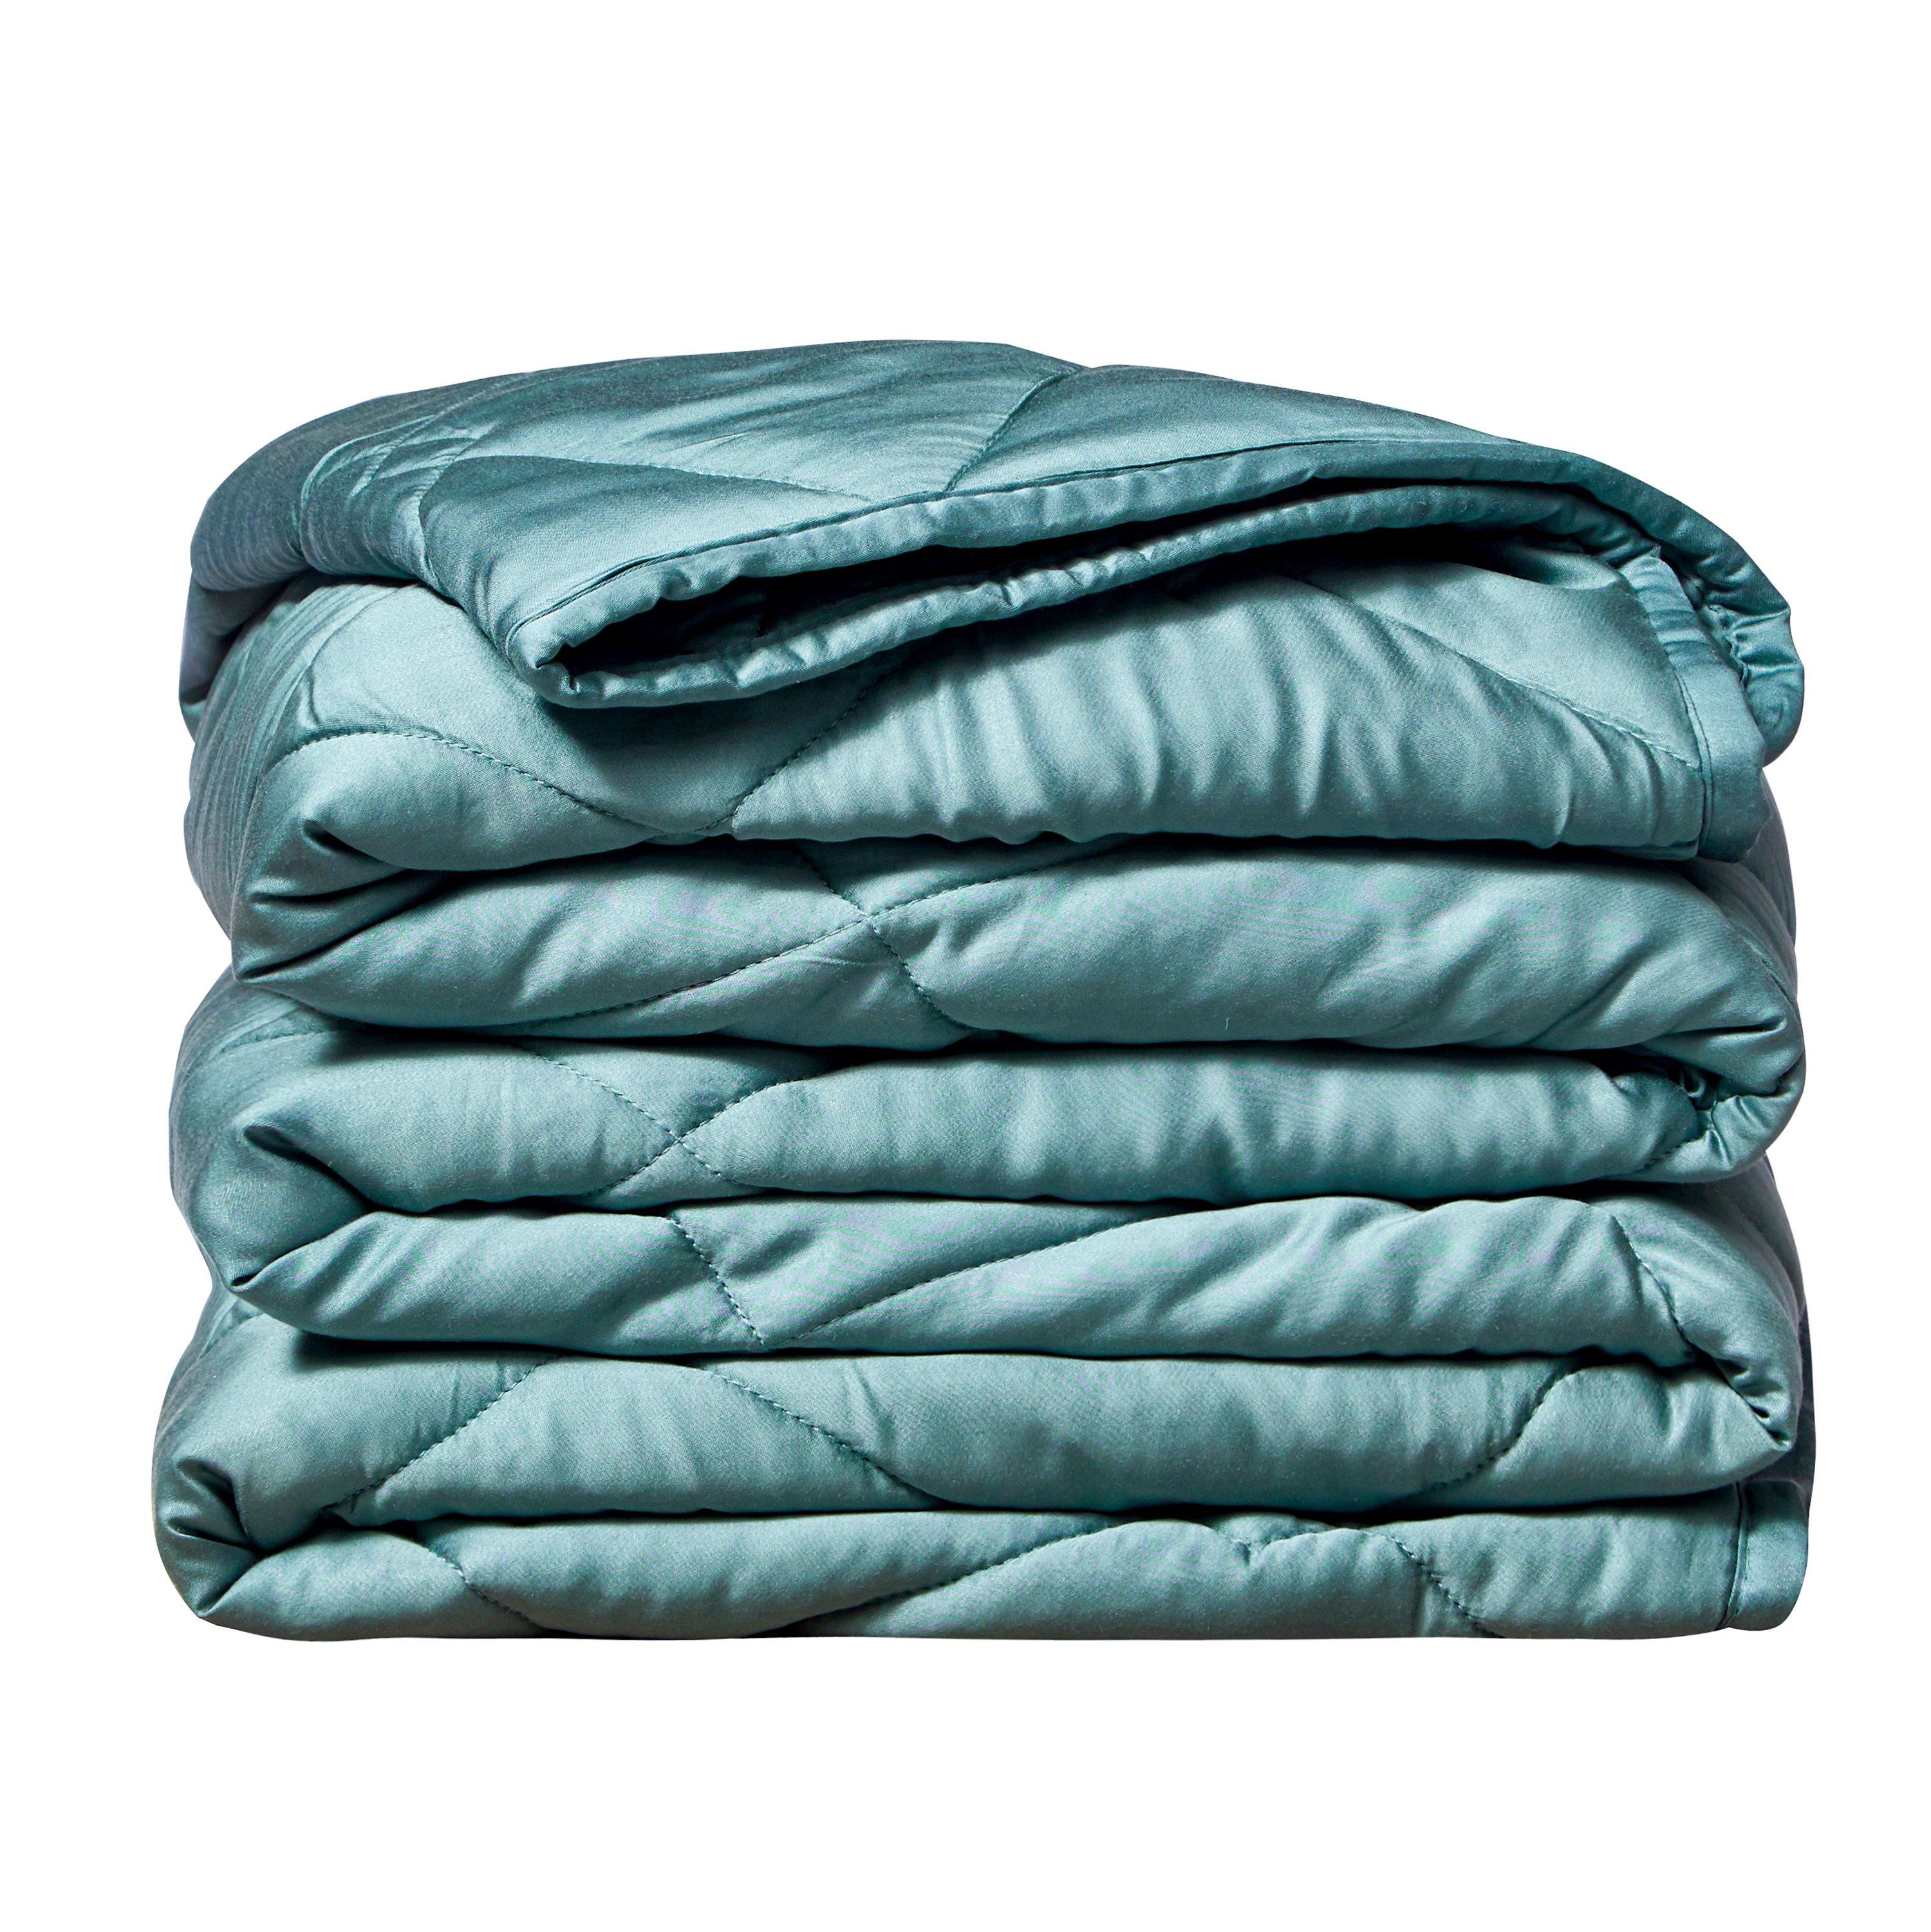 Breathable Bamboo 12 lb Weighted Throw Blanket